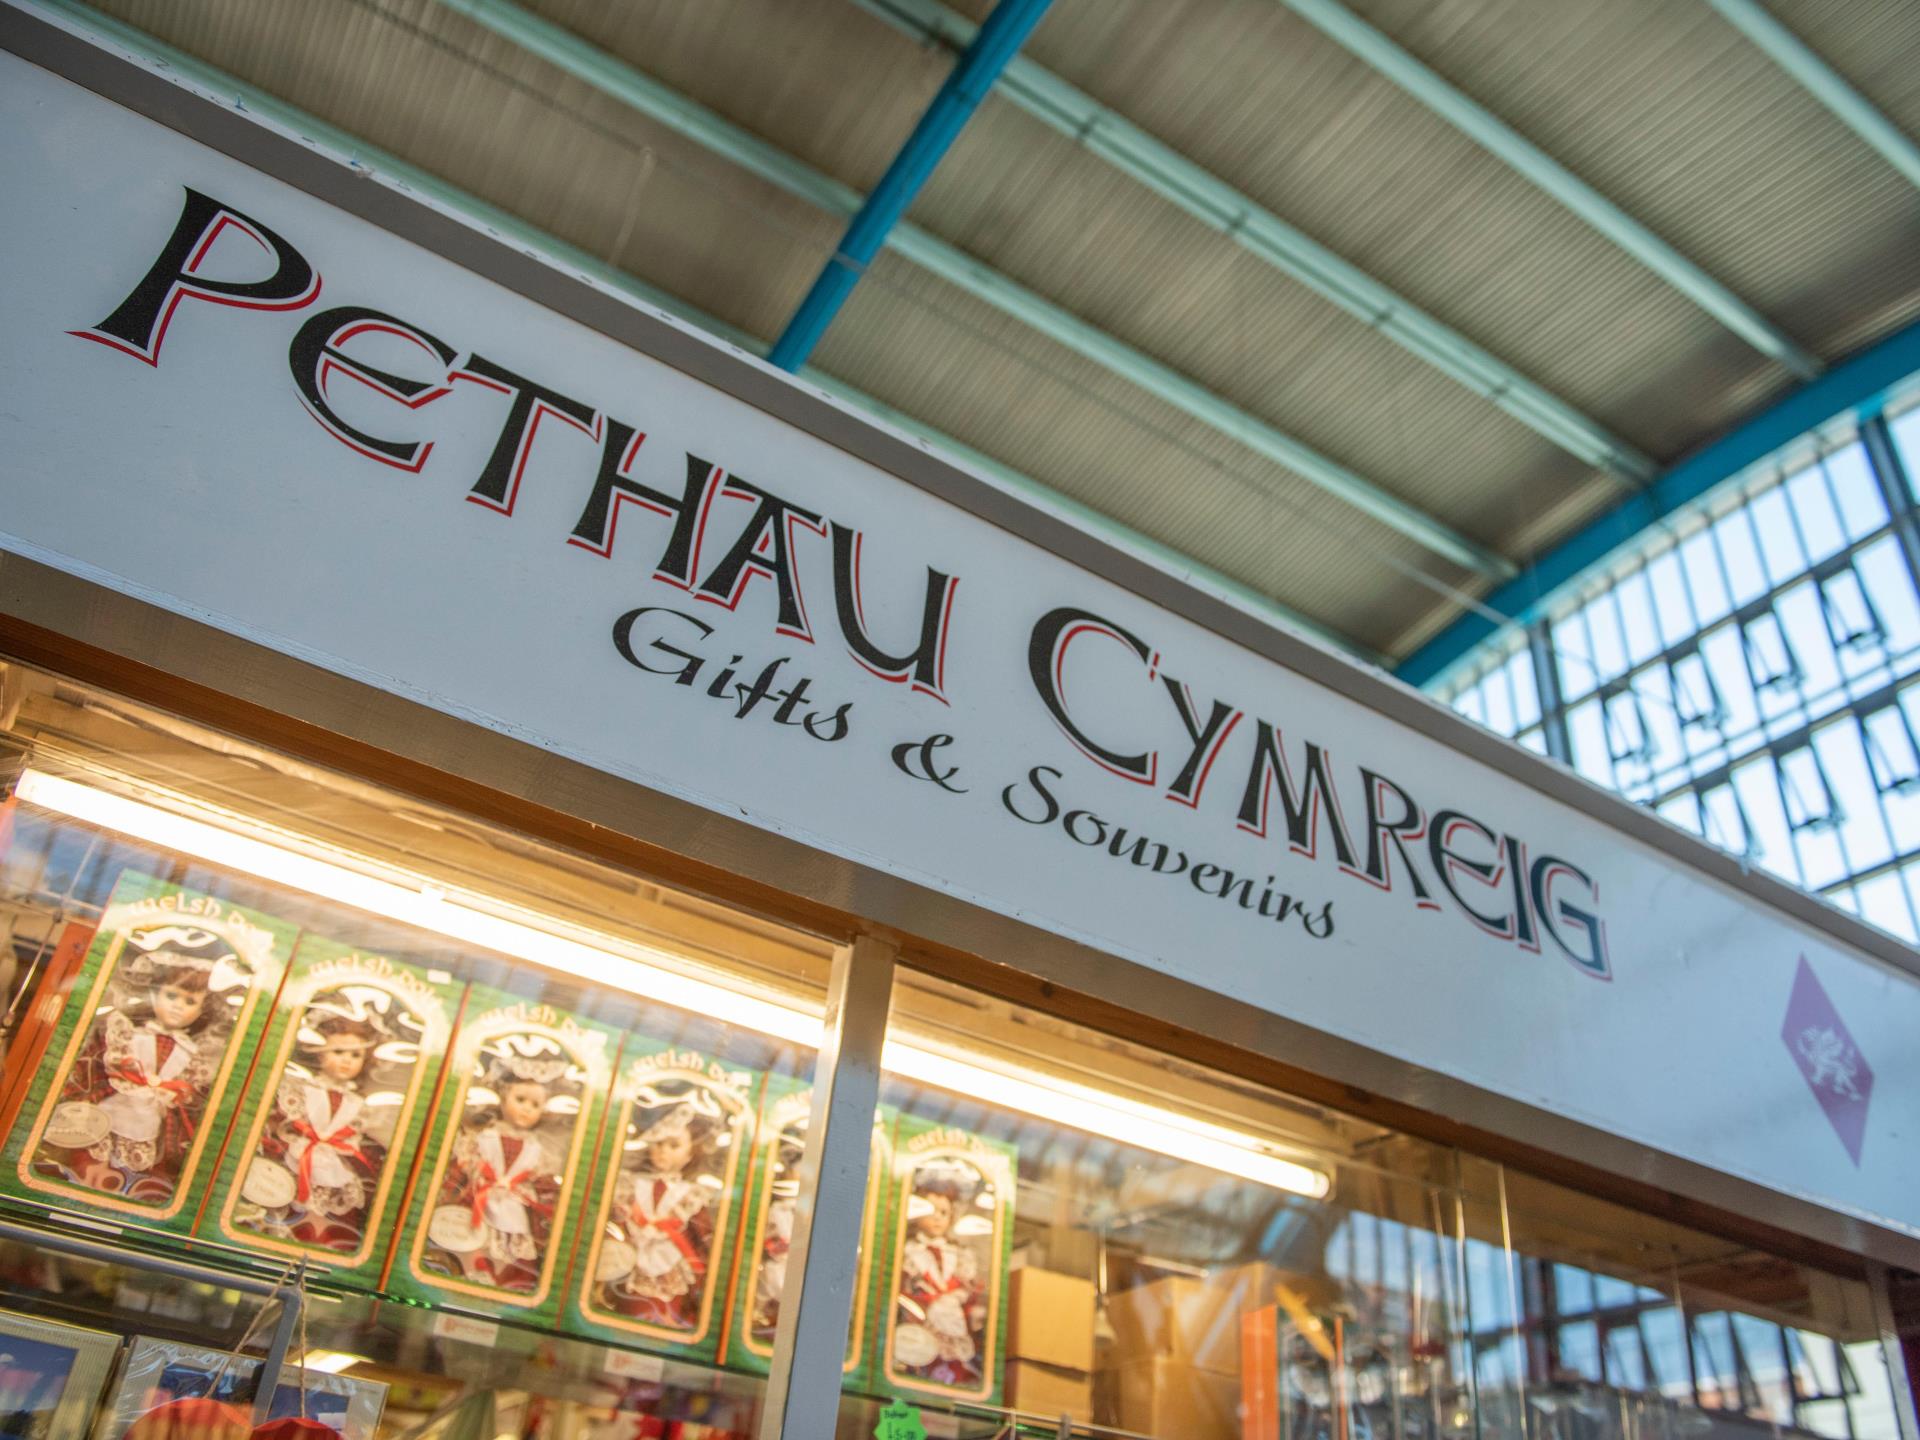 Pethay Cymreig - Gifts & Souvenirs Stall